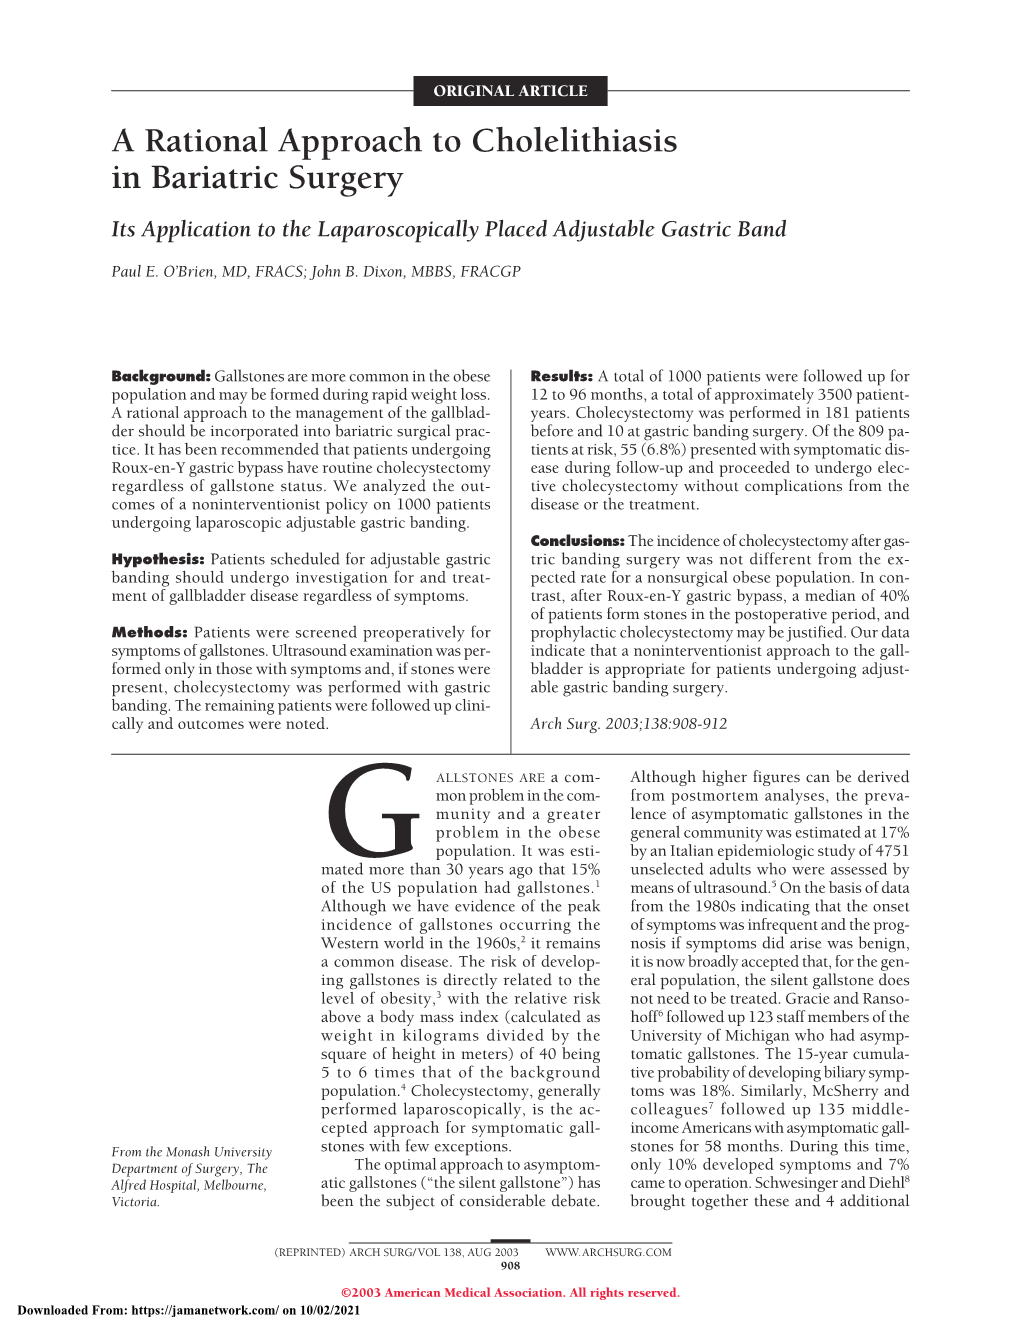 A Rational Approach to Cholelithiasis in Bariatric Surgery Its Application to the Laparoscopically Placed Adjustable Gastric Band